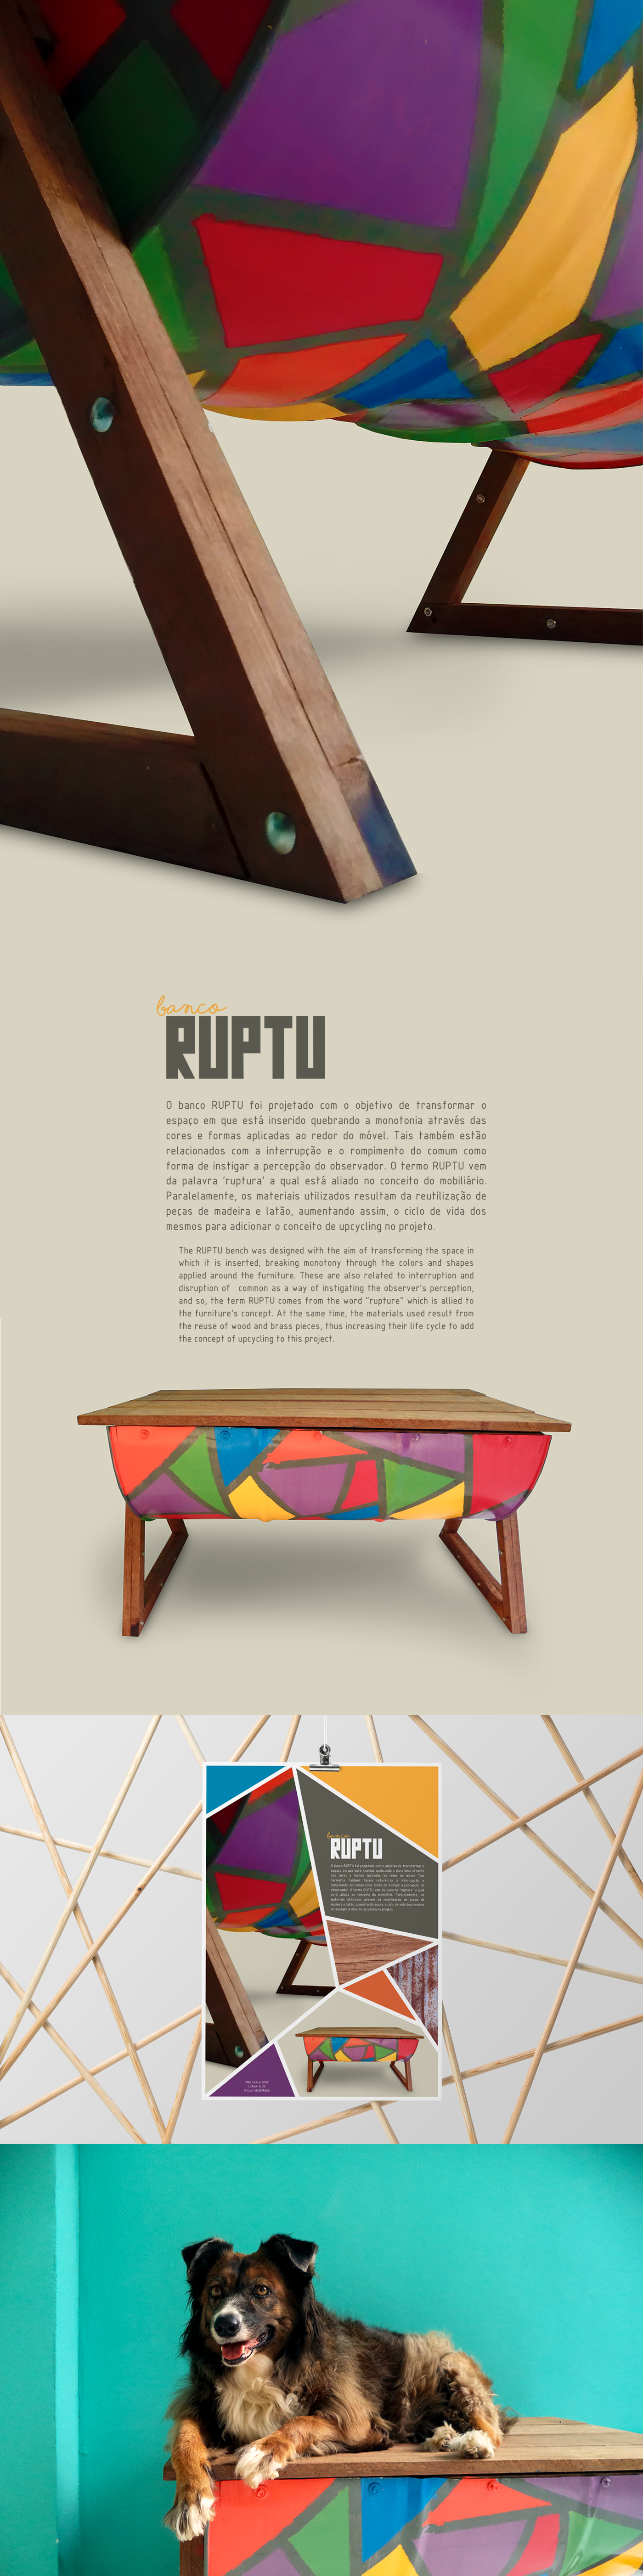 furniture design upcycling product design  Sustainability